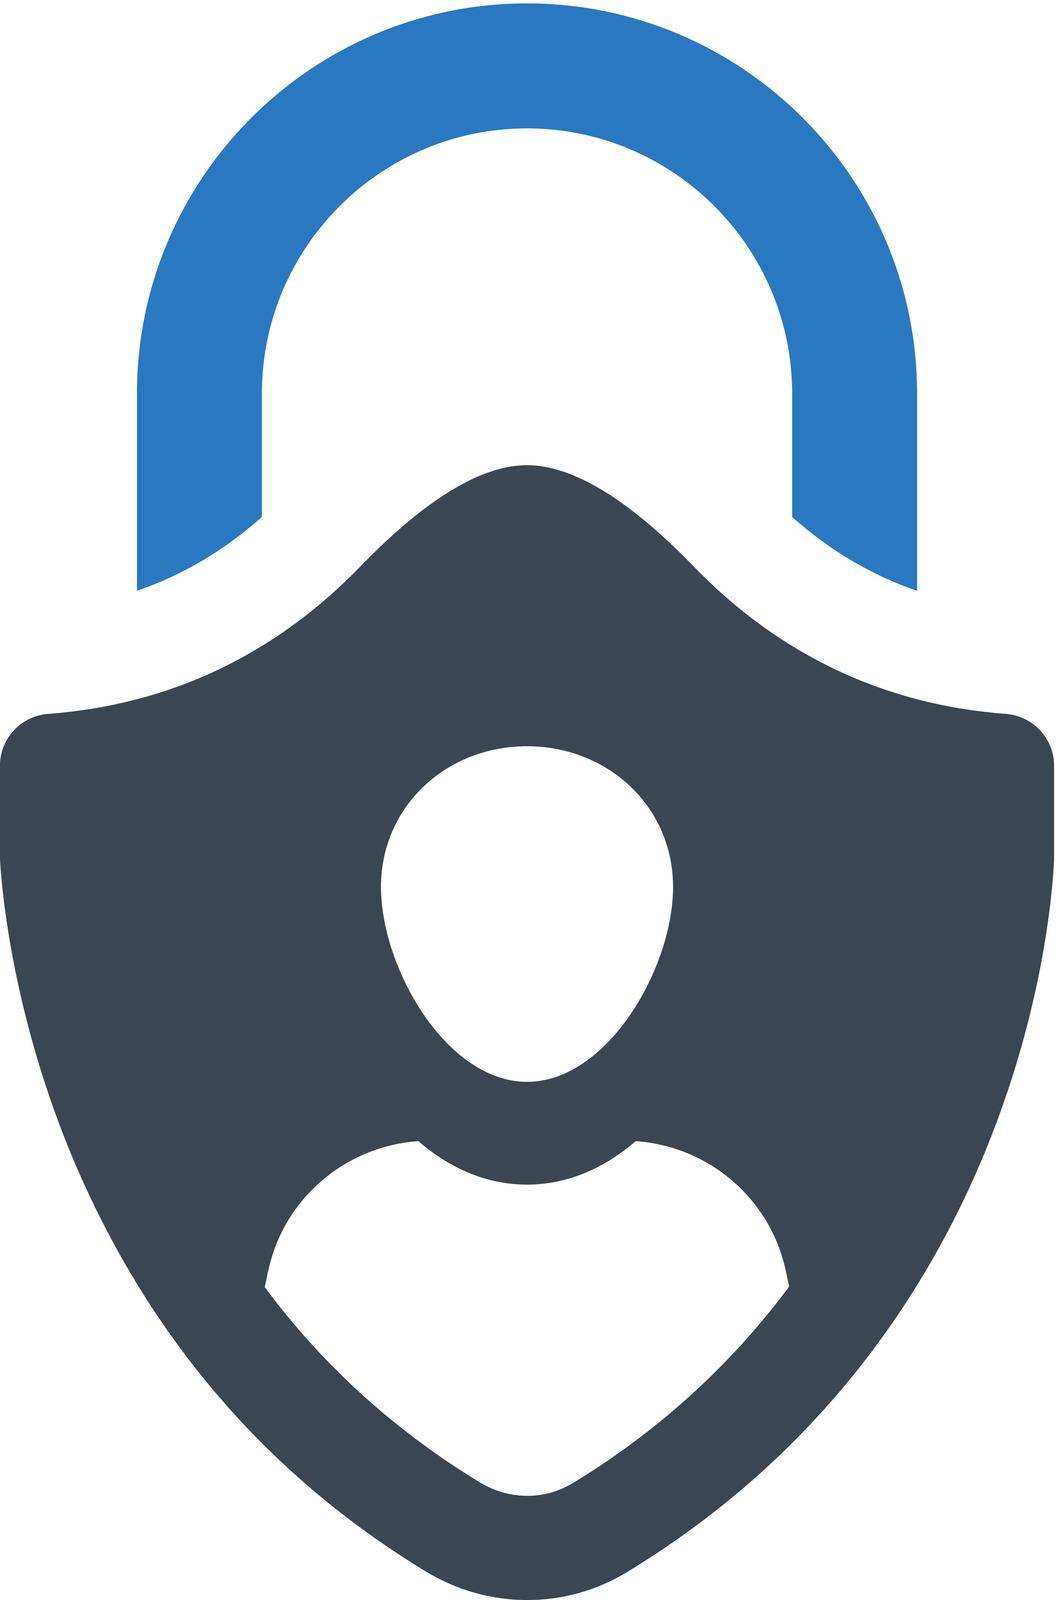 User privacy icon by delwar018